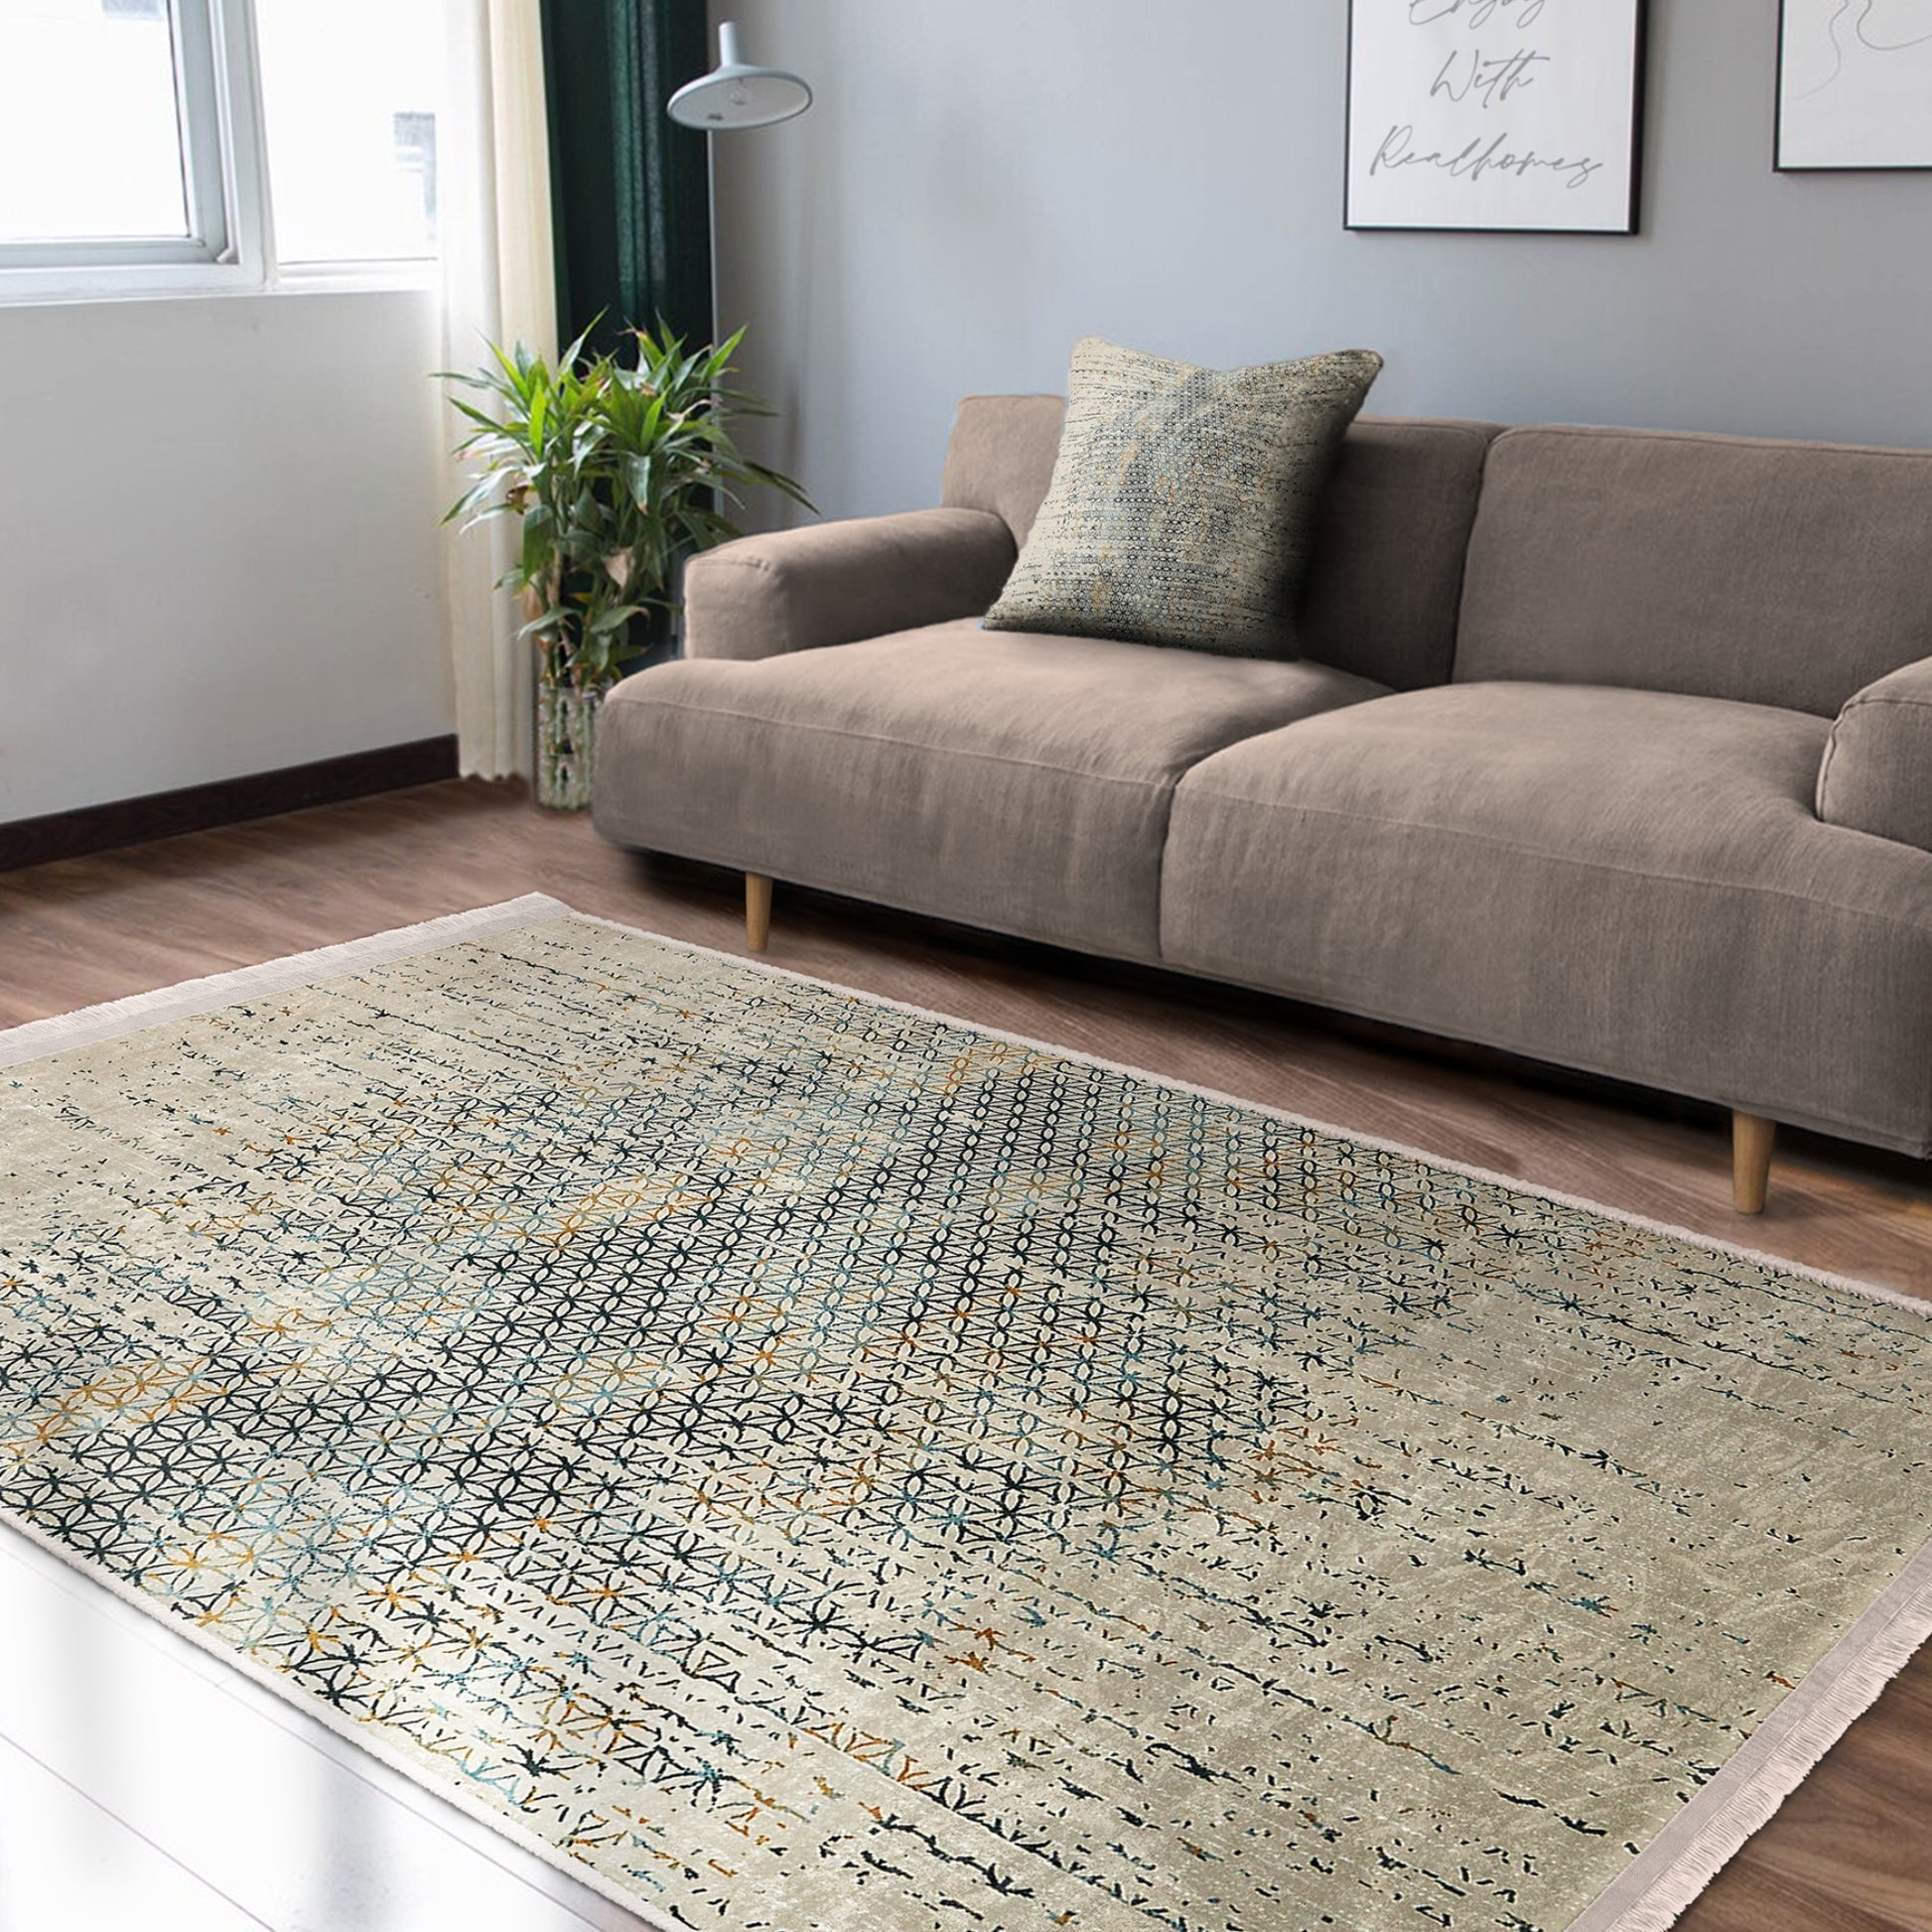 Jute Patterned Area Rug for a Touch of Natural Elegance